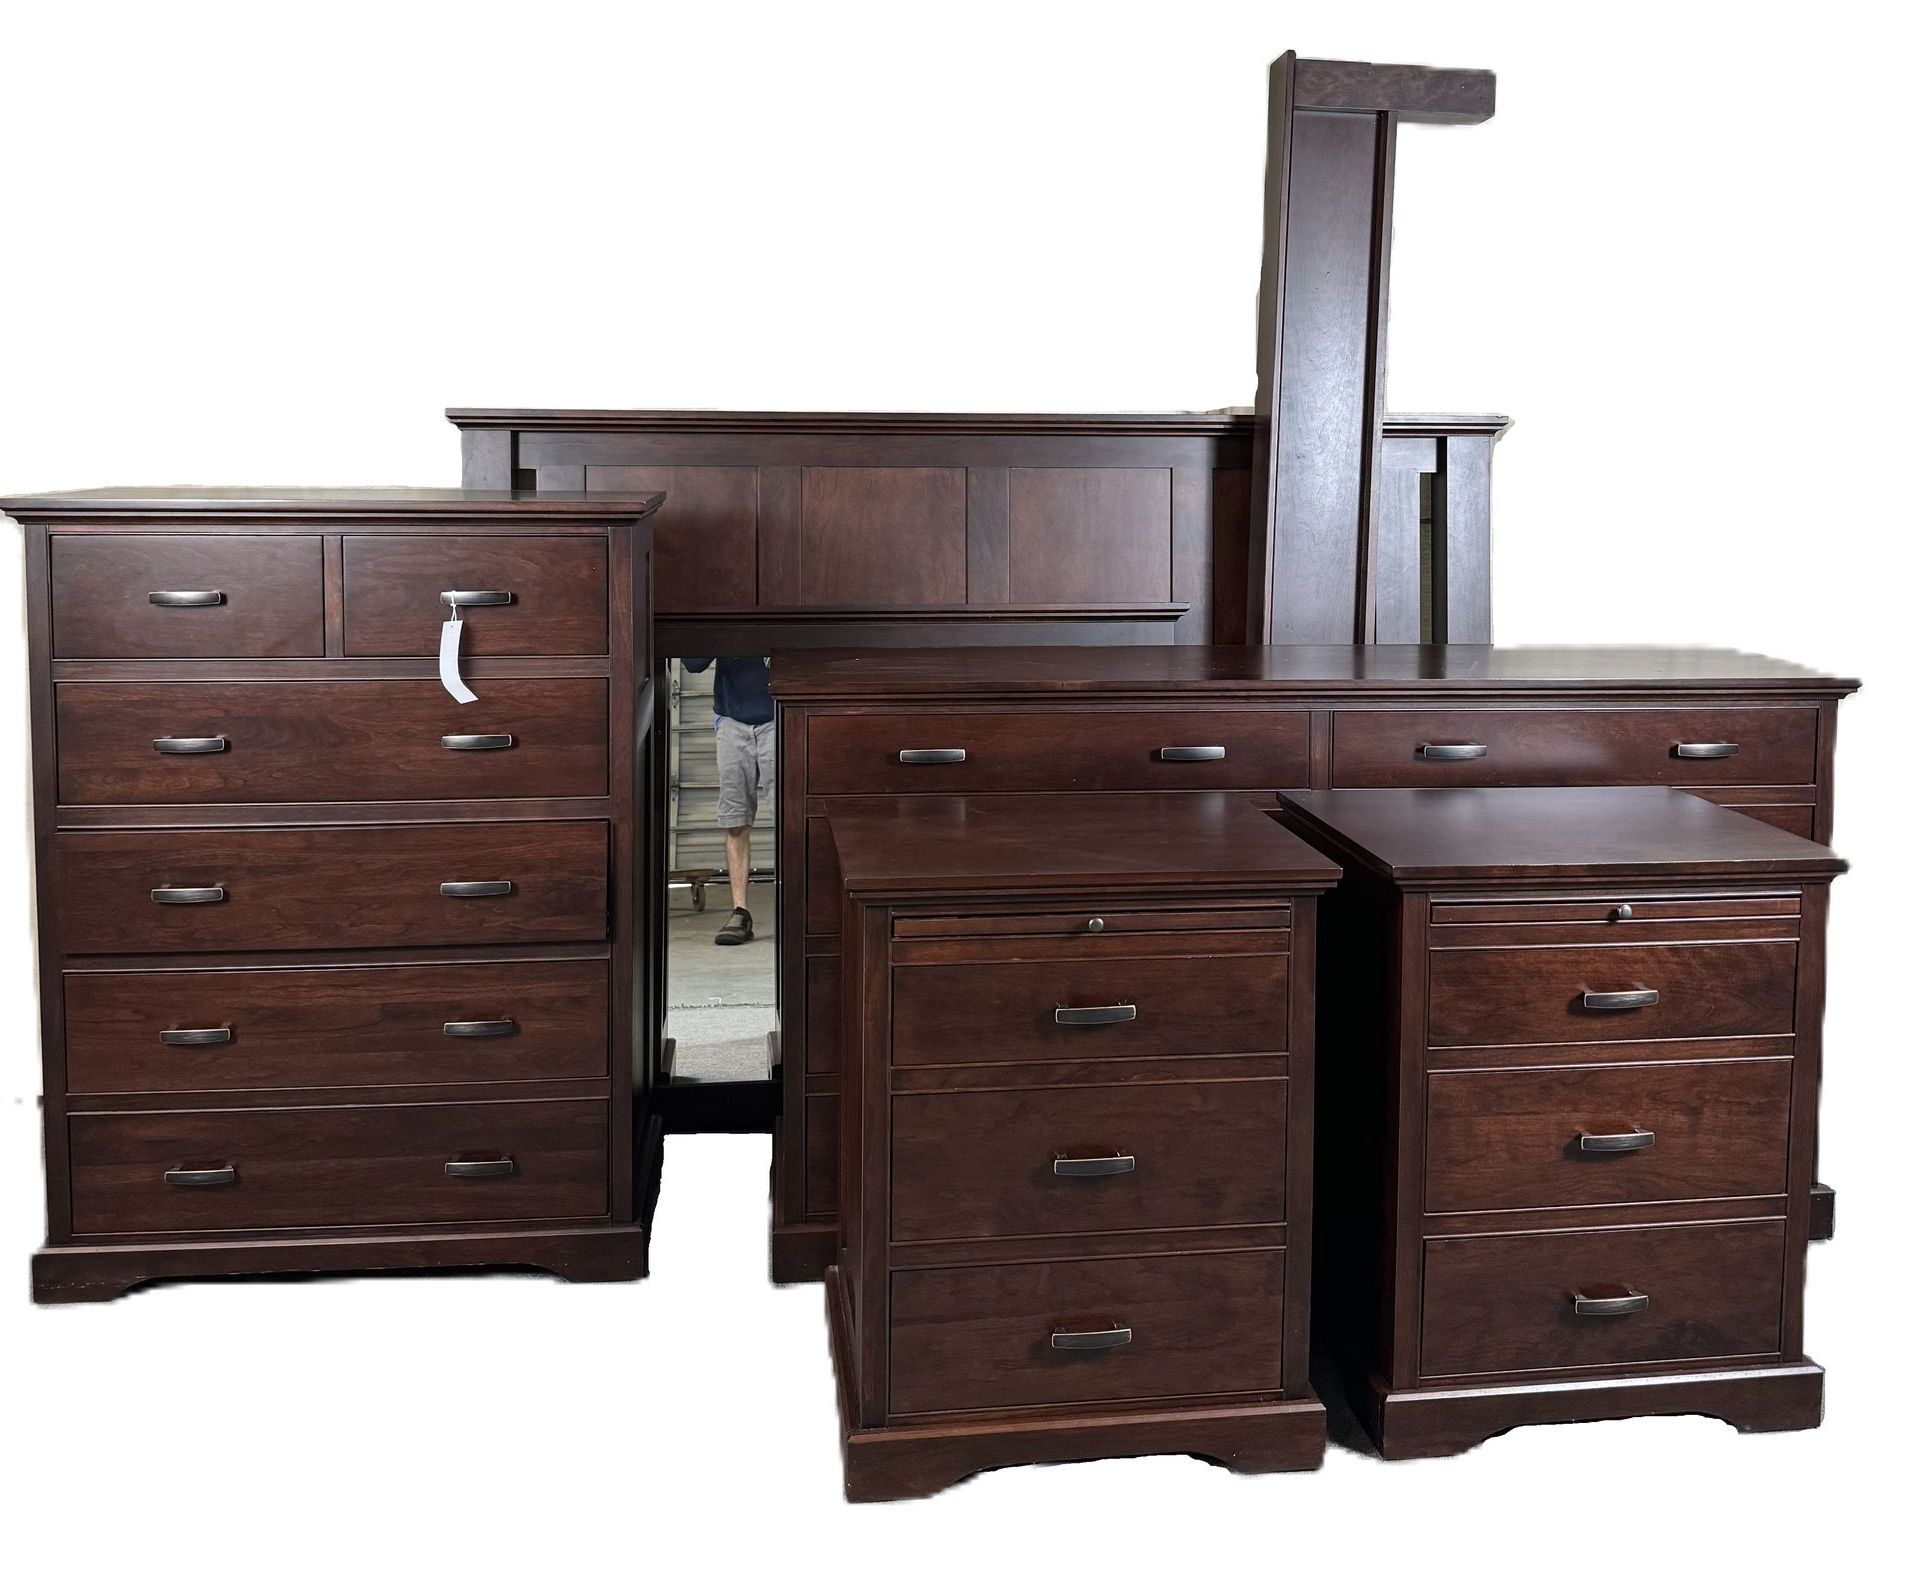 Pre-owned bedroom furniture available at Bratz Consignment Furniture Warehouse in Fort Myers, FL.